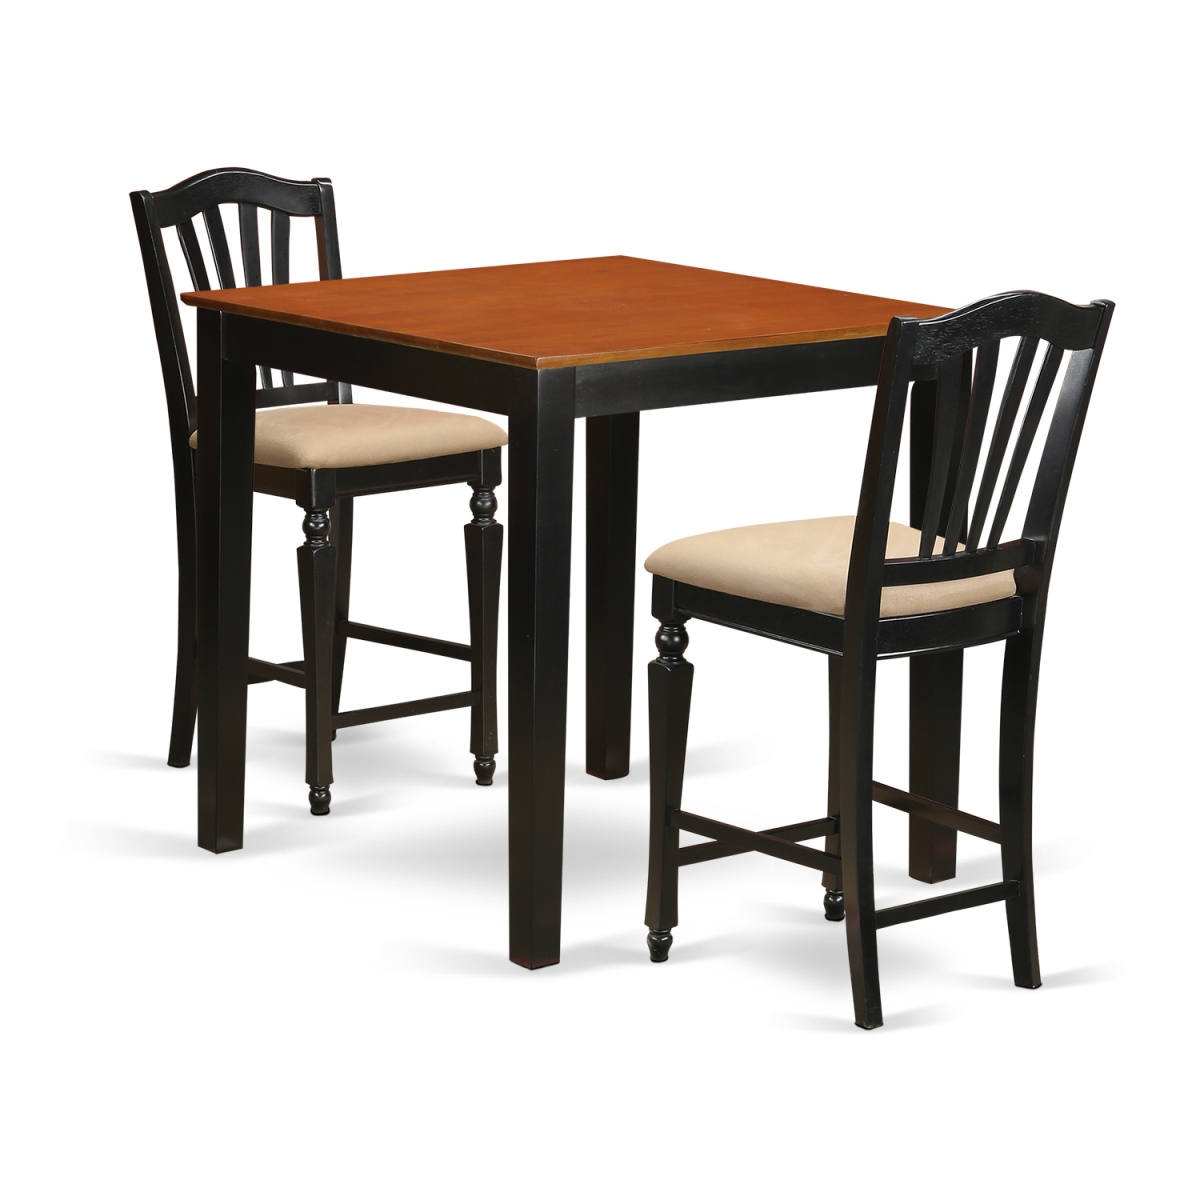 Picture of East West Furniture PBCH3-BLK-C Pub High Top Table & 2 Kitchen Chairs, Black Finish